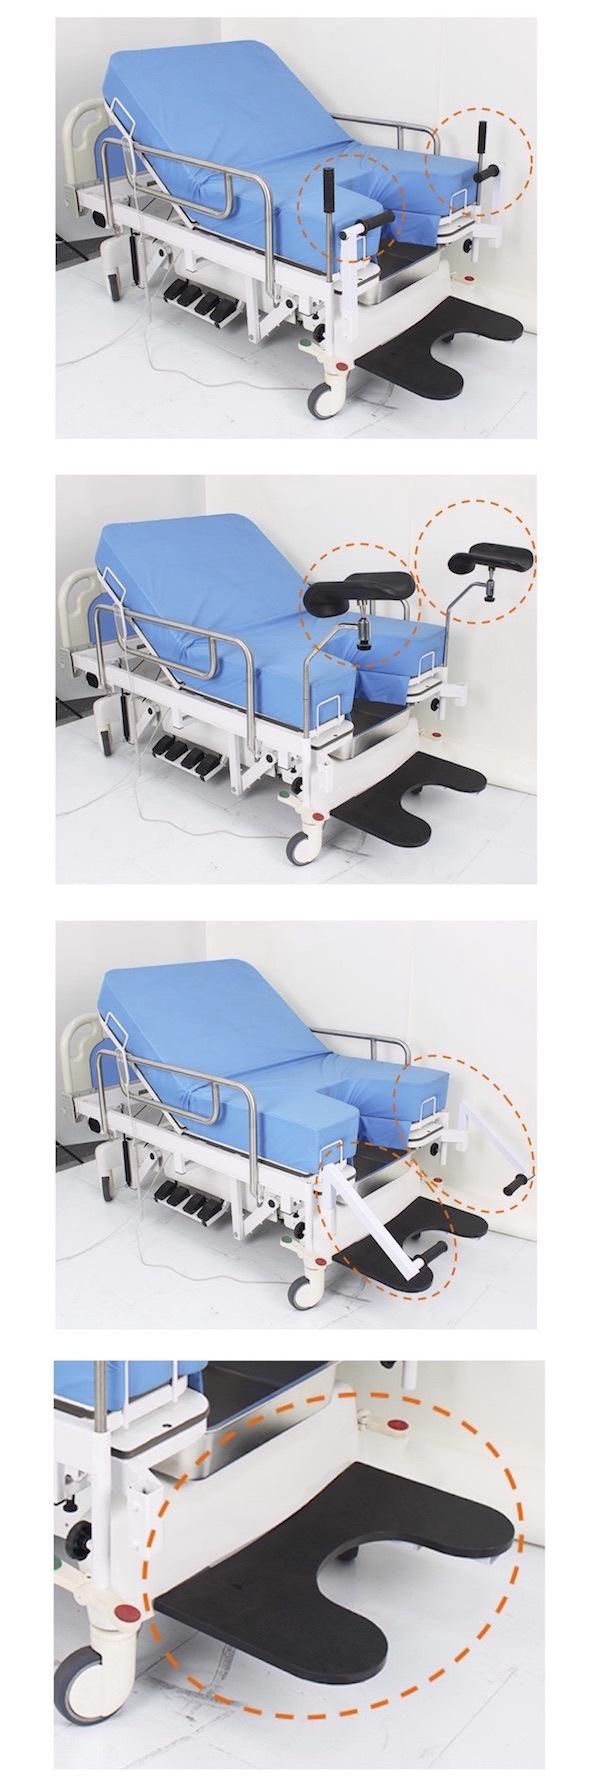 HS5248 Medical Electrical Obstetric Childbirth Gynecology Operation Bed Table with Rack